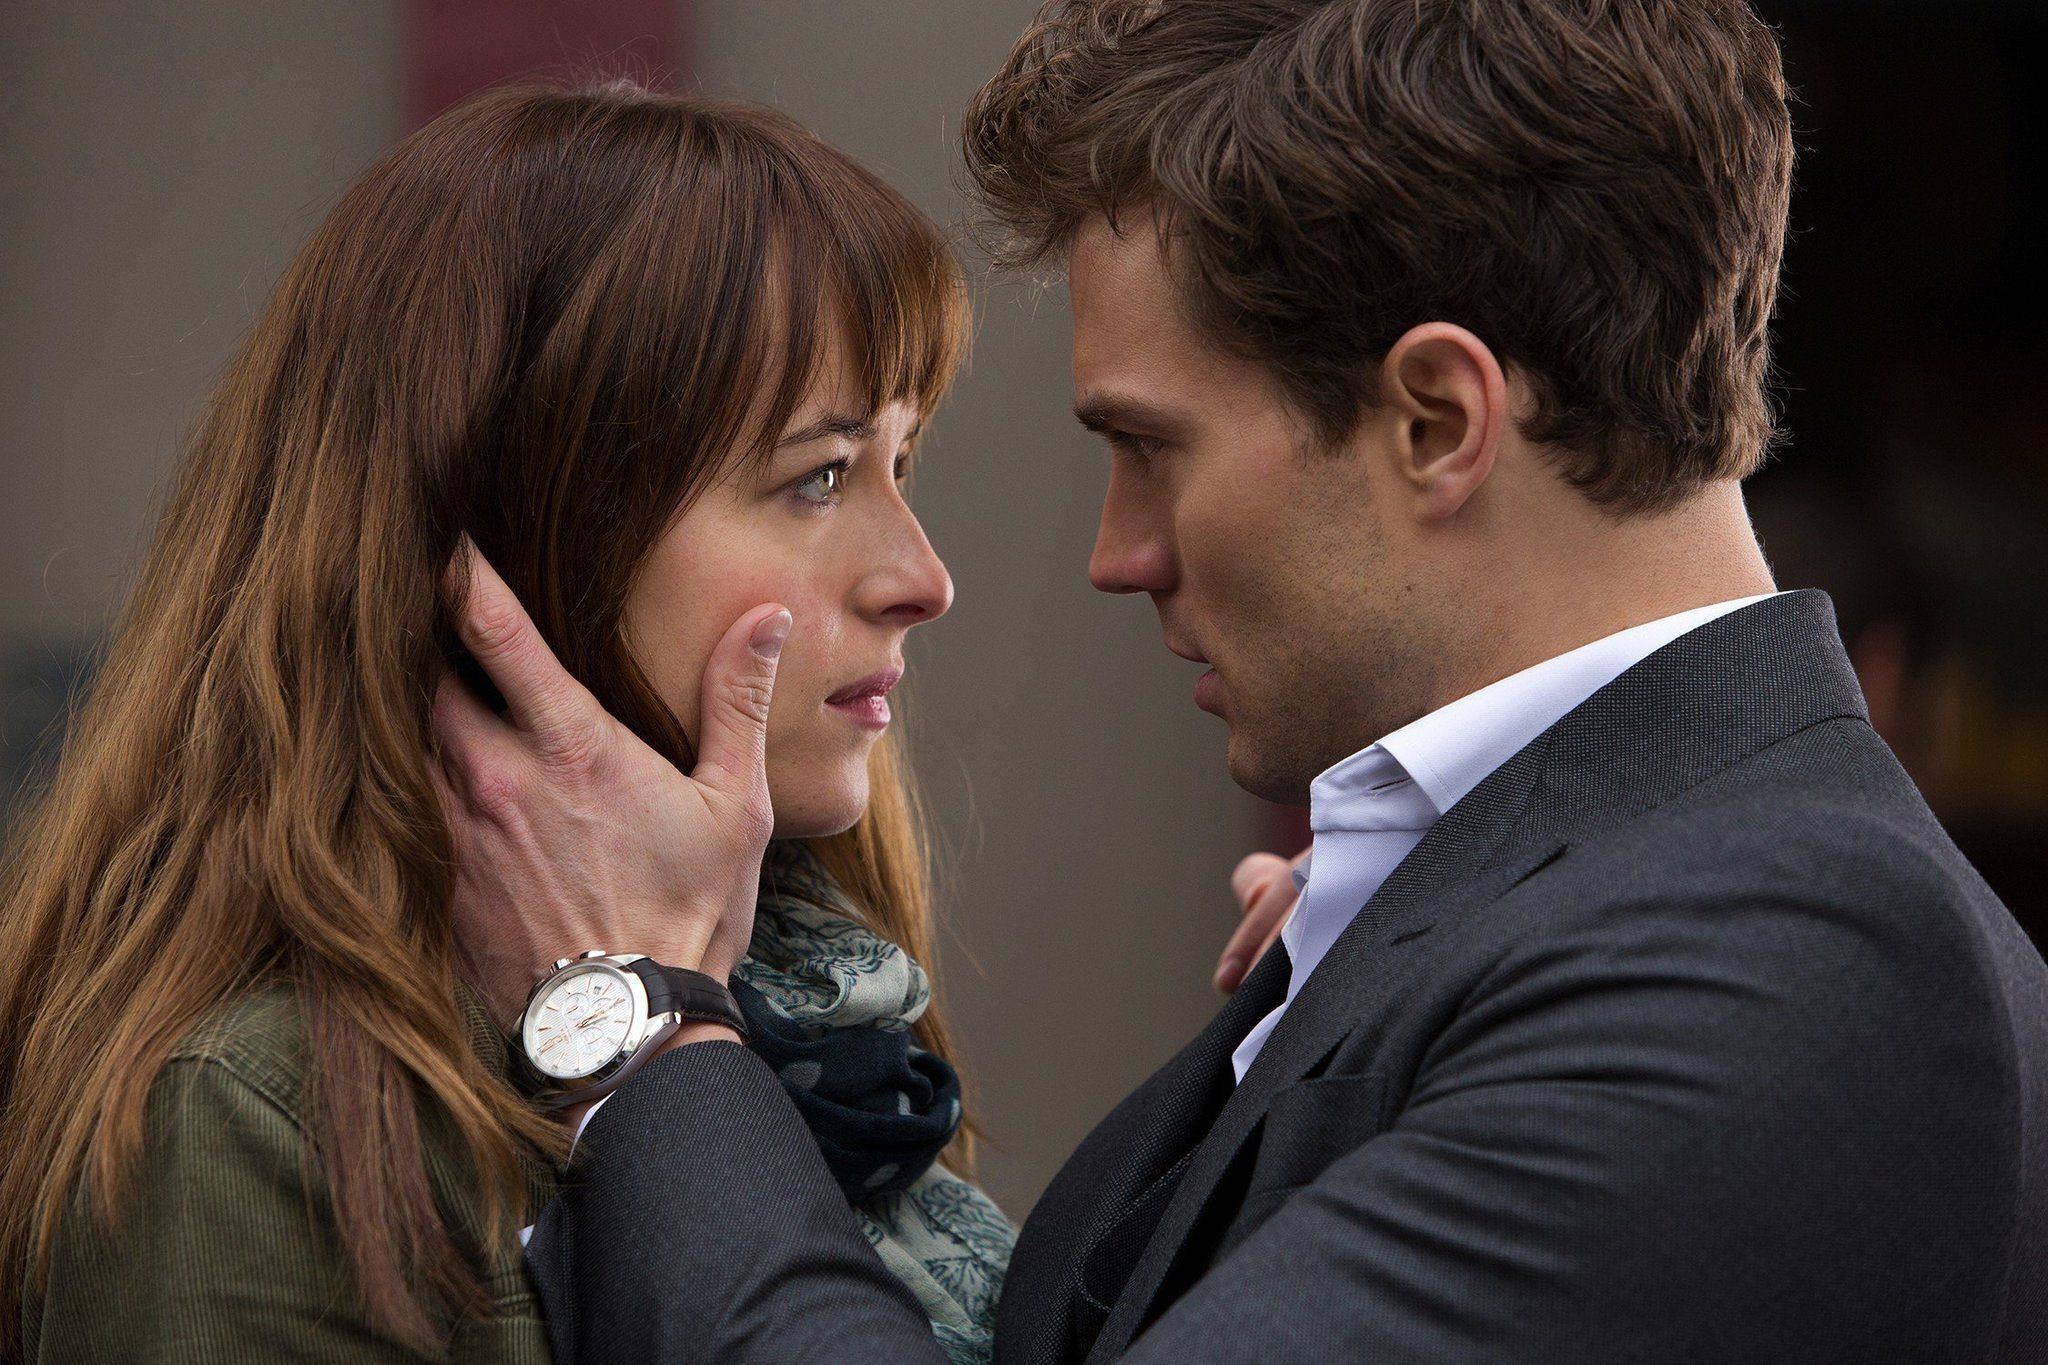 fifty-shades-is-back-with-a-book-told-entirely-from-christian-grey-s-perspective-434857